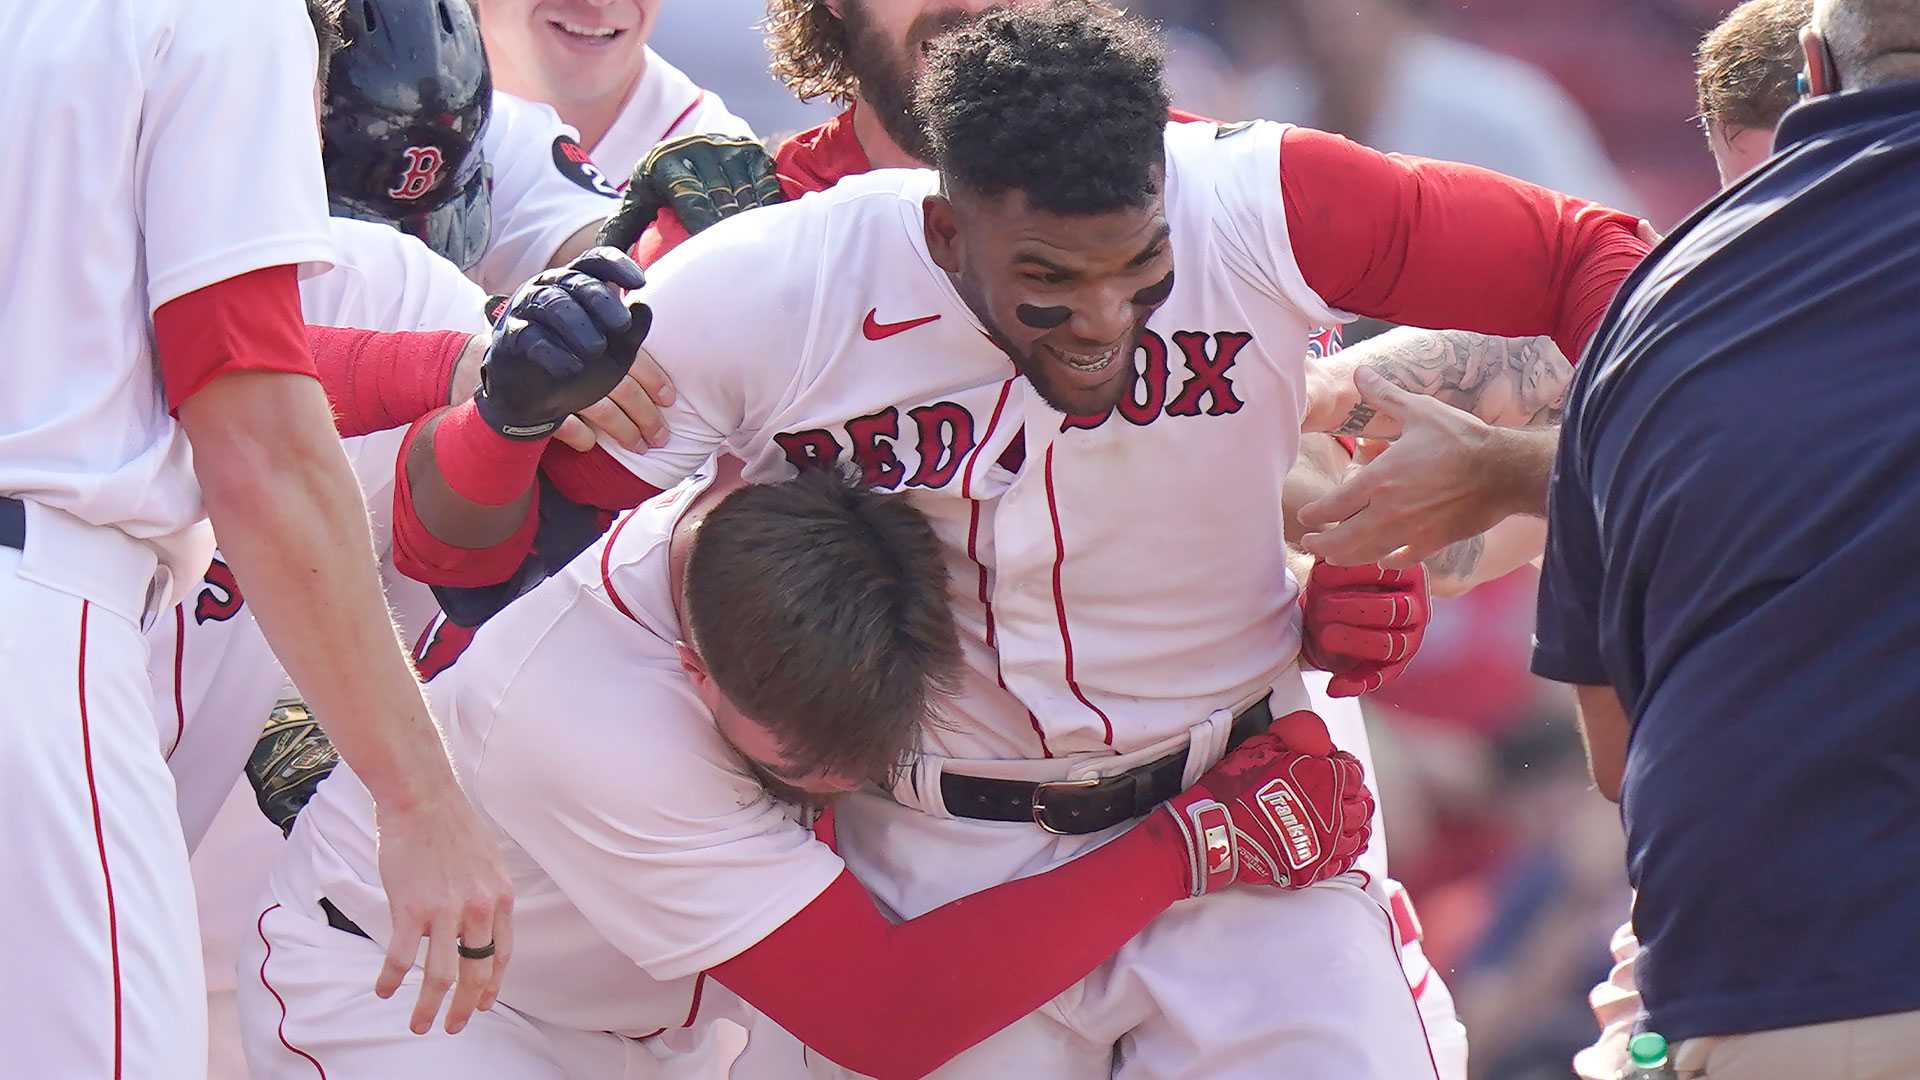 Red Sox defeat Mariners with Cordero's walk-off grand slam in 10th